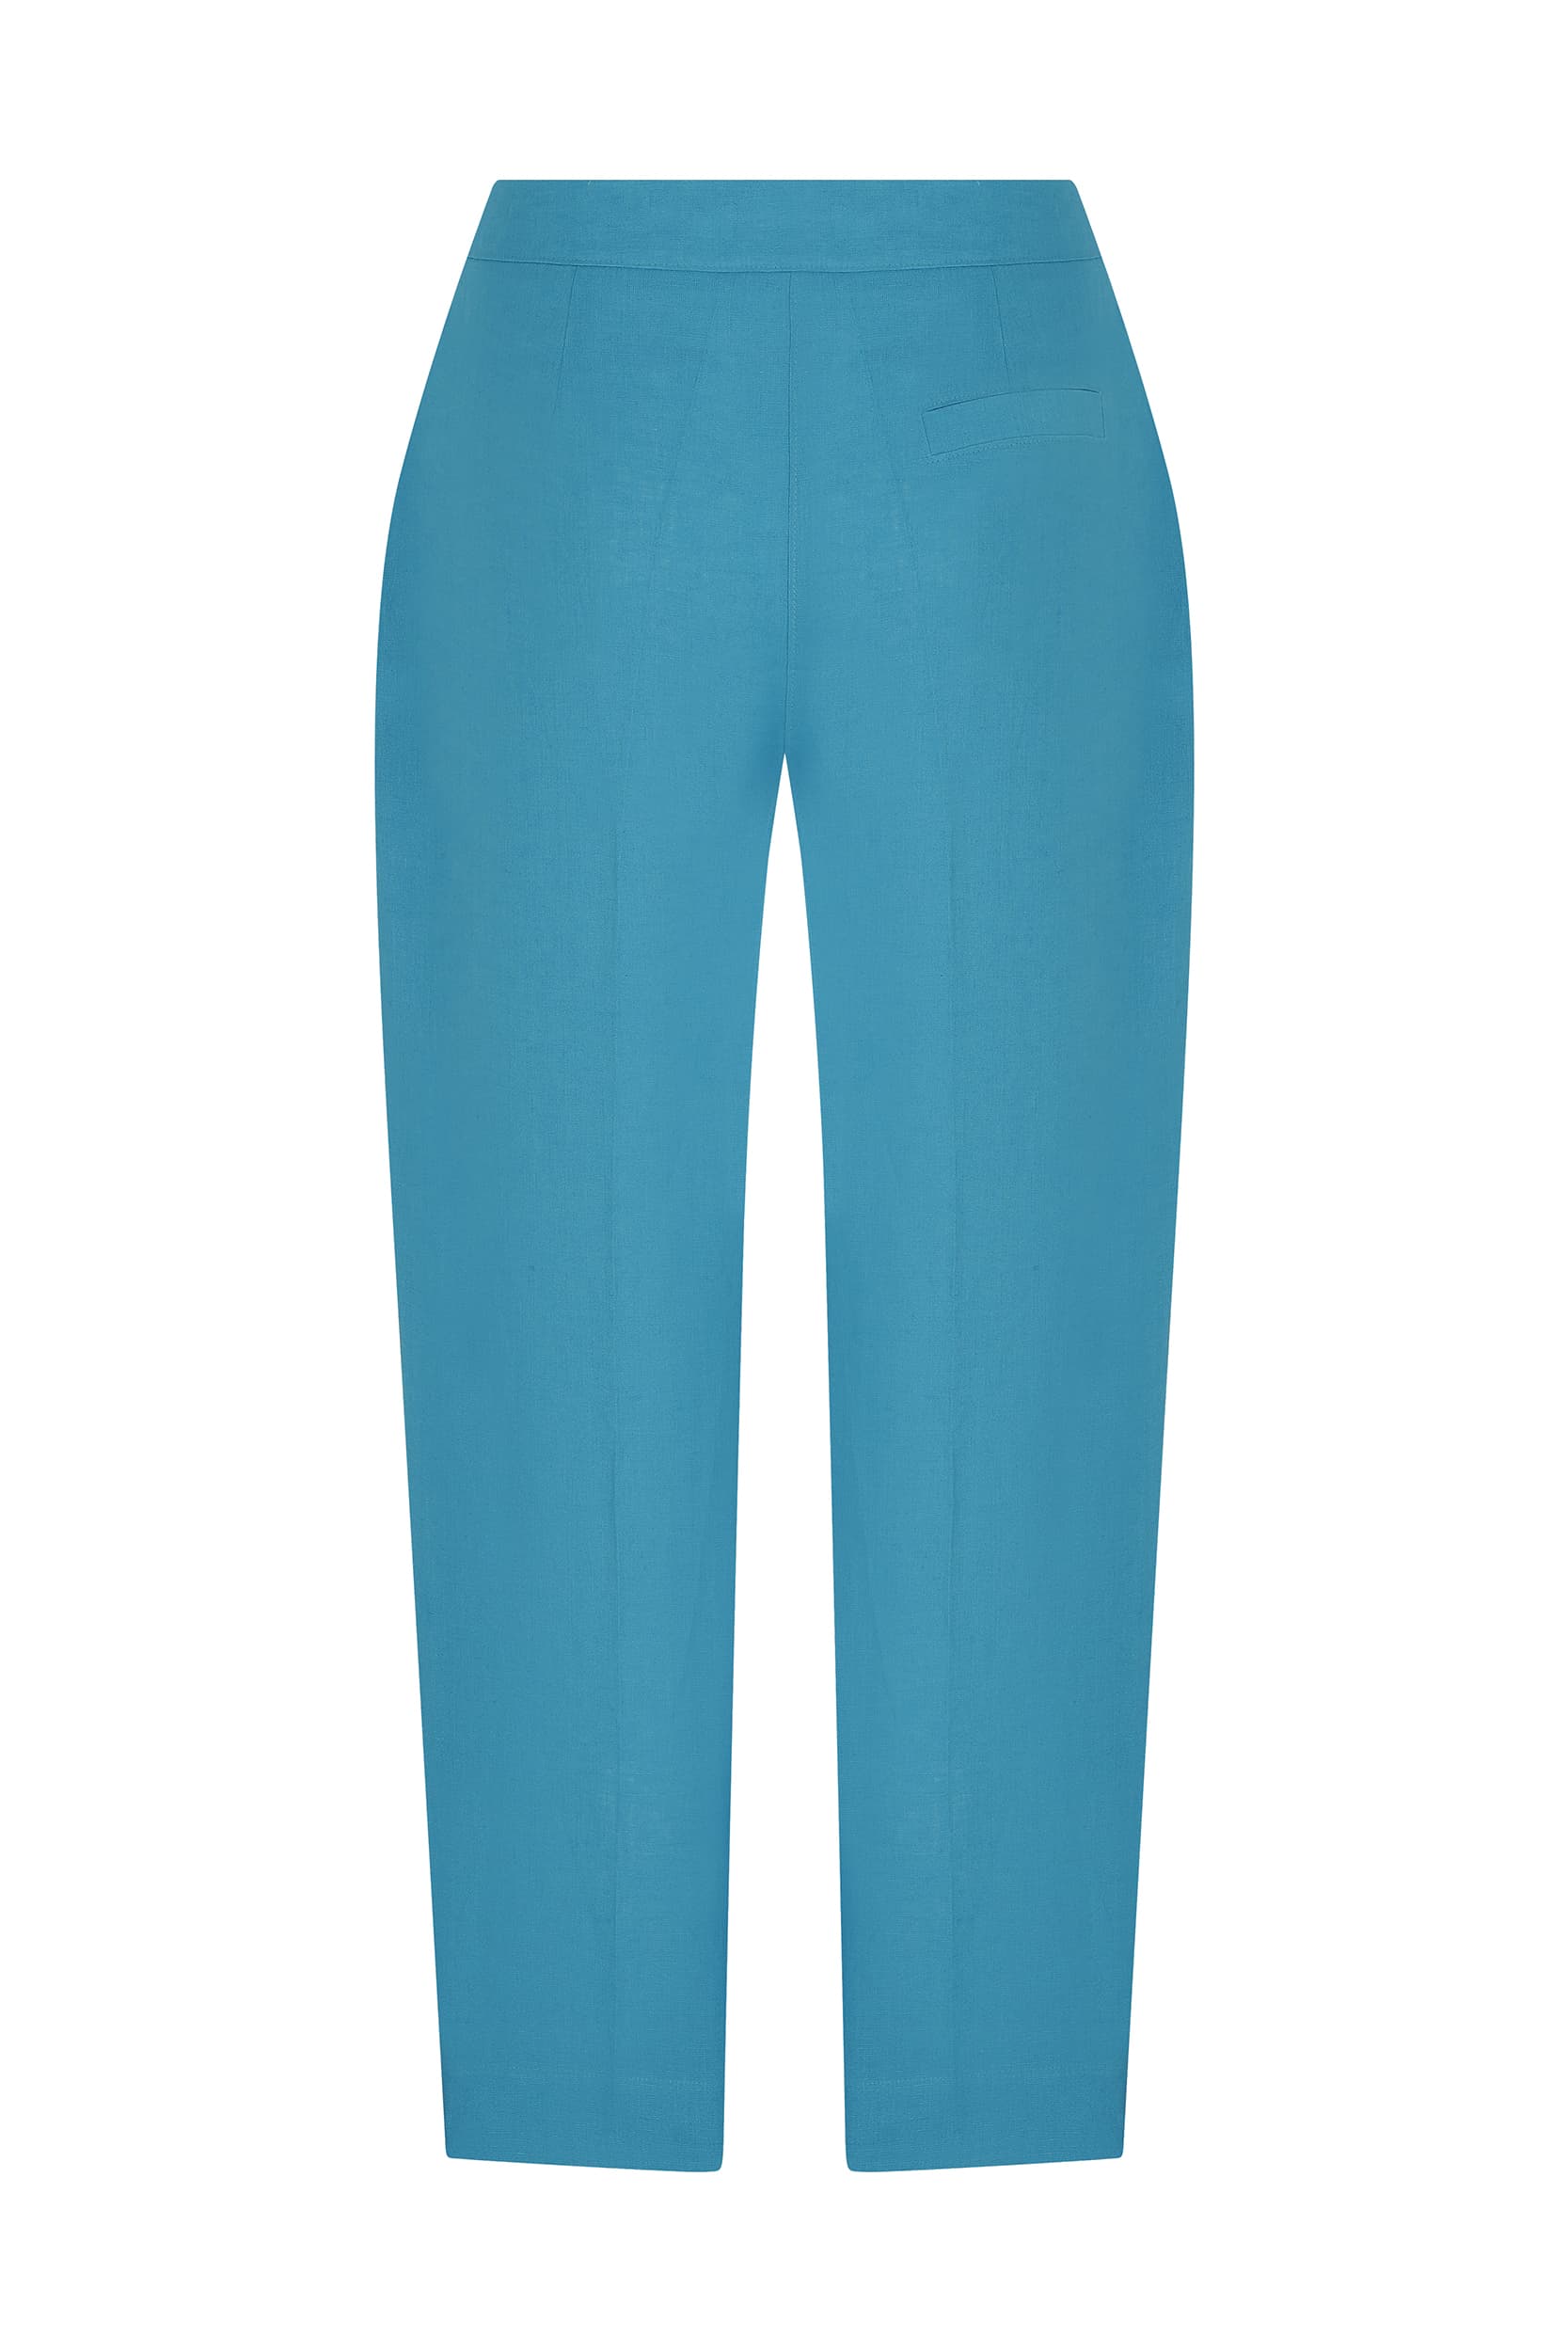 Wide Leg Trousers -- [TURQUOISE]